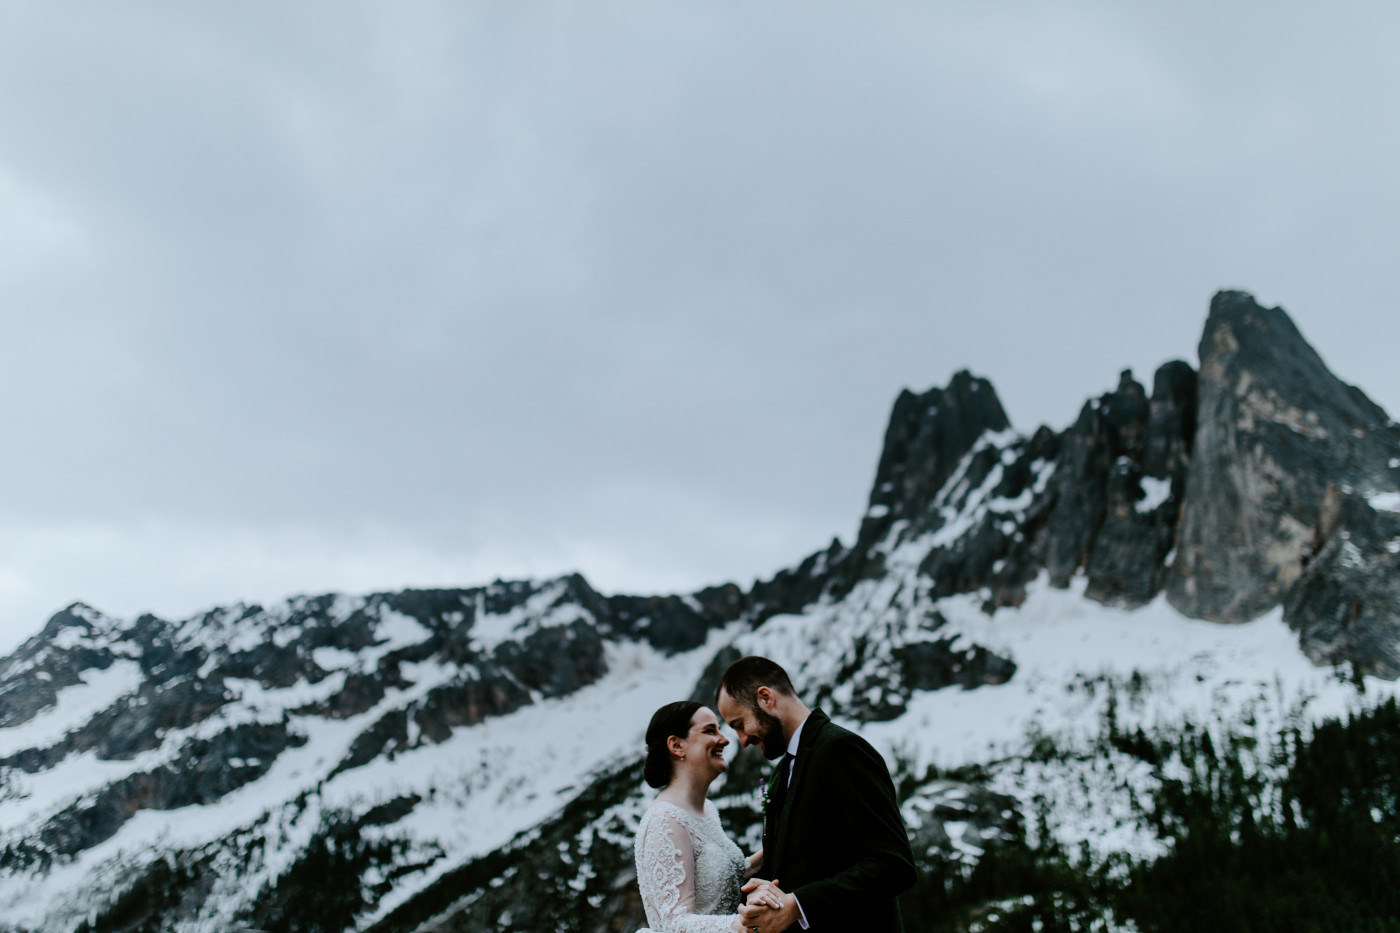 Elizabeth and Alex forehead to forehead. Elopement photography at North Cascades National Park by Sienna Plus Josh.